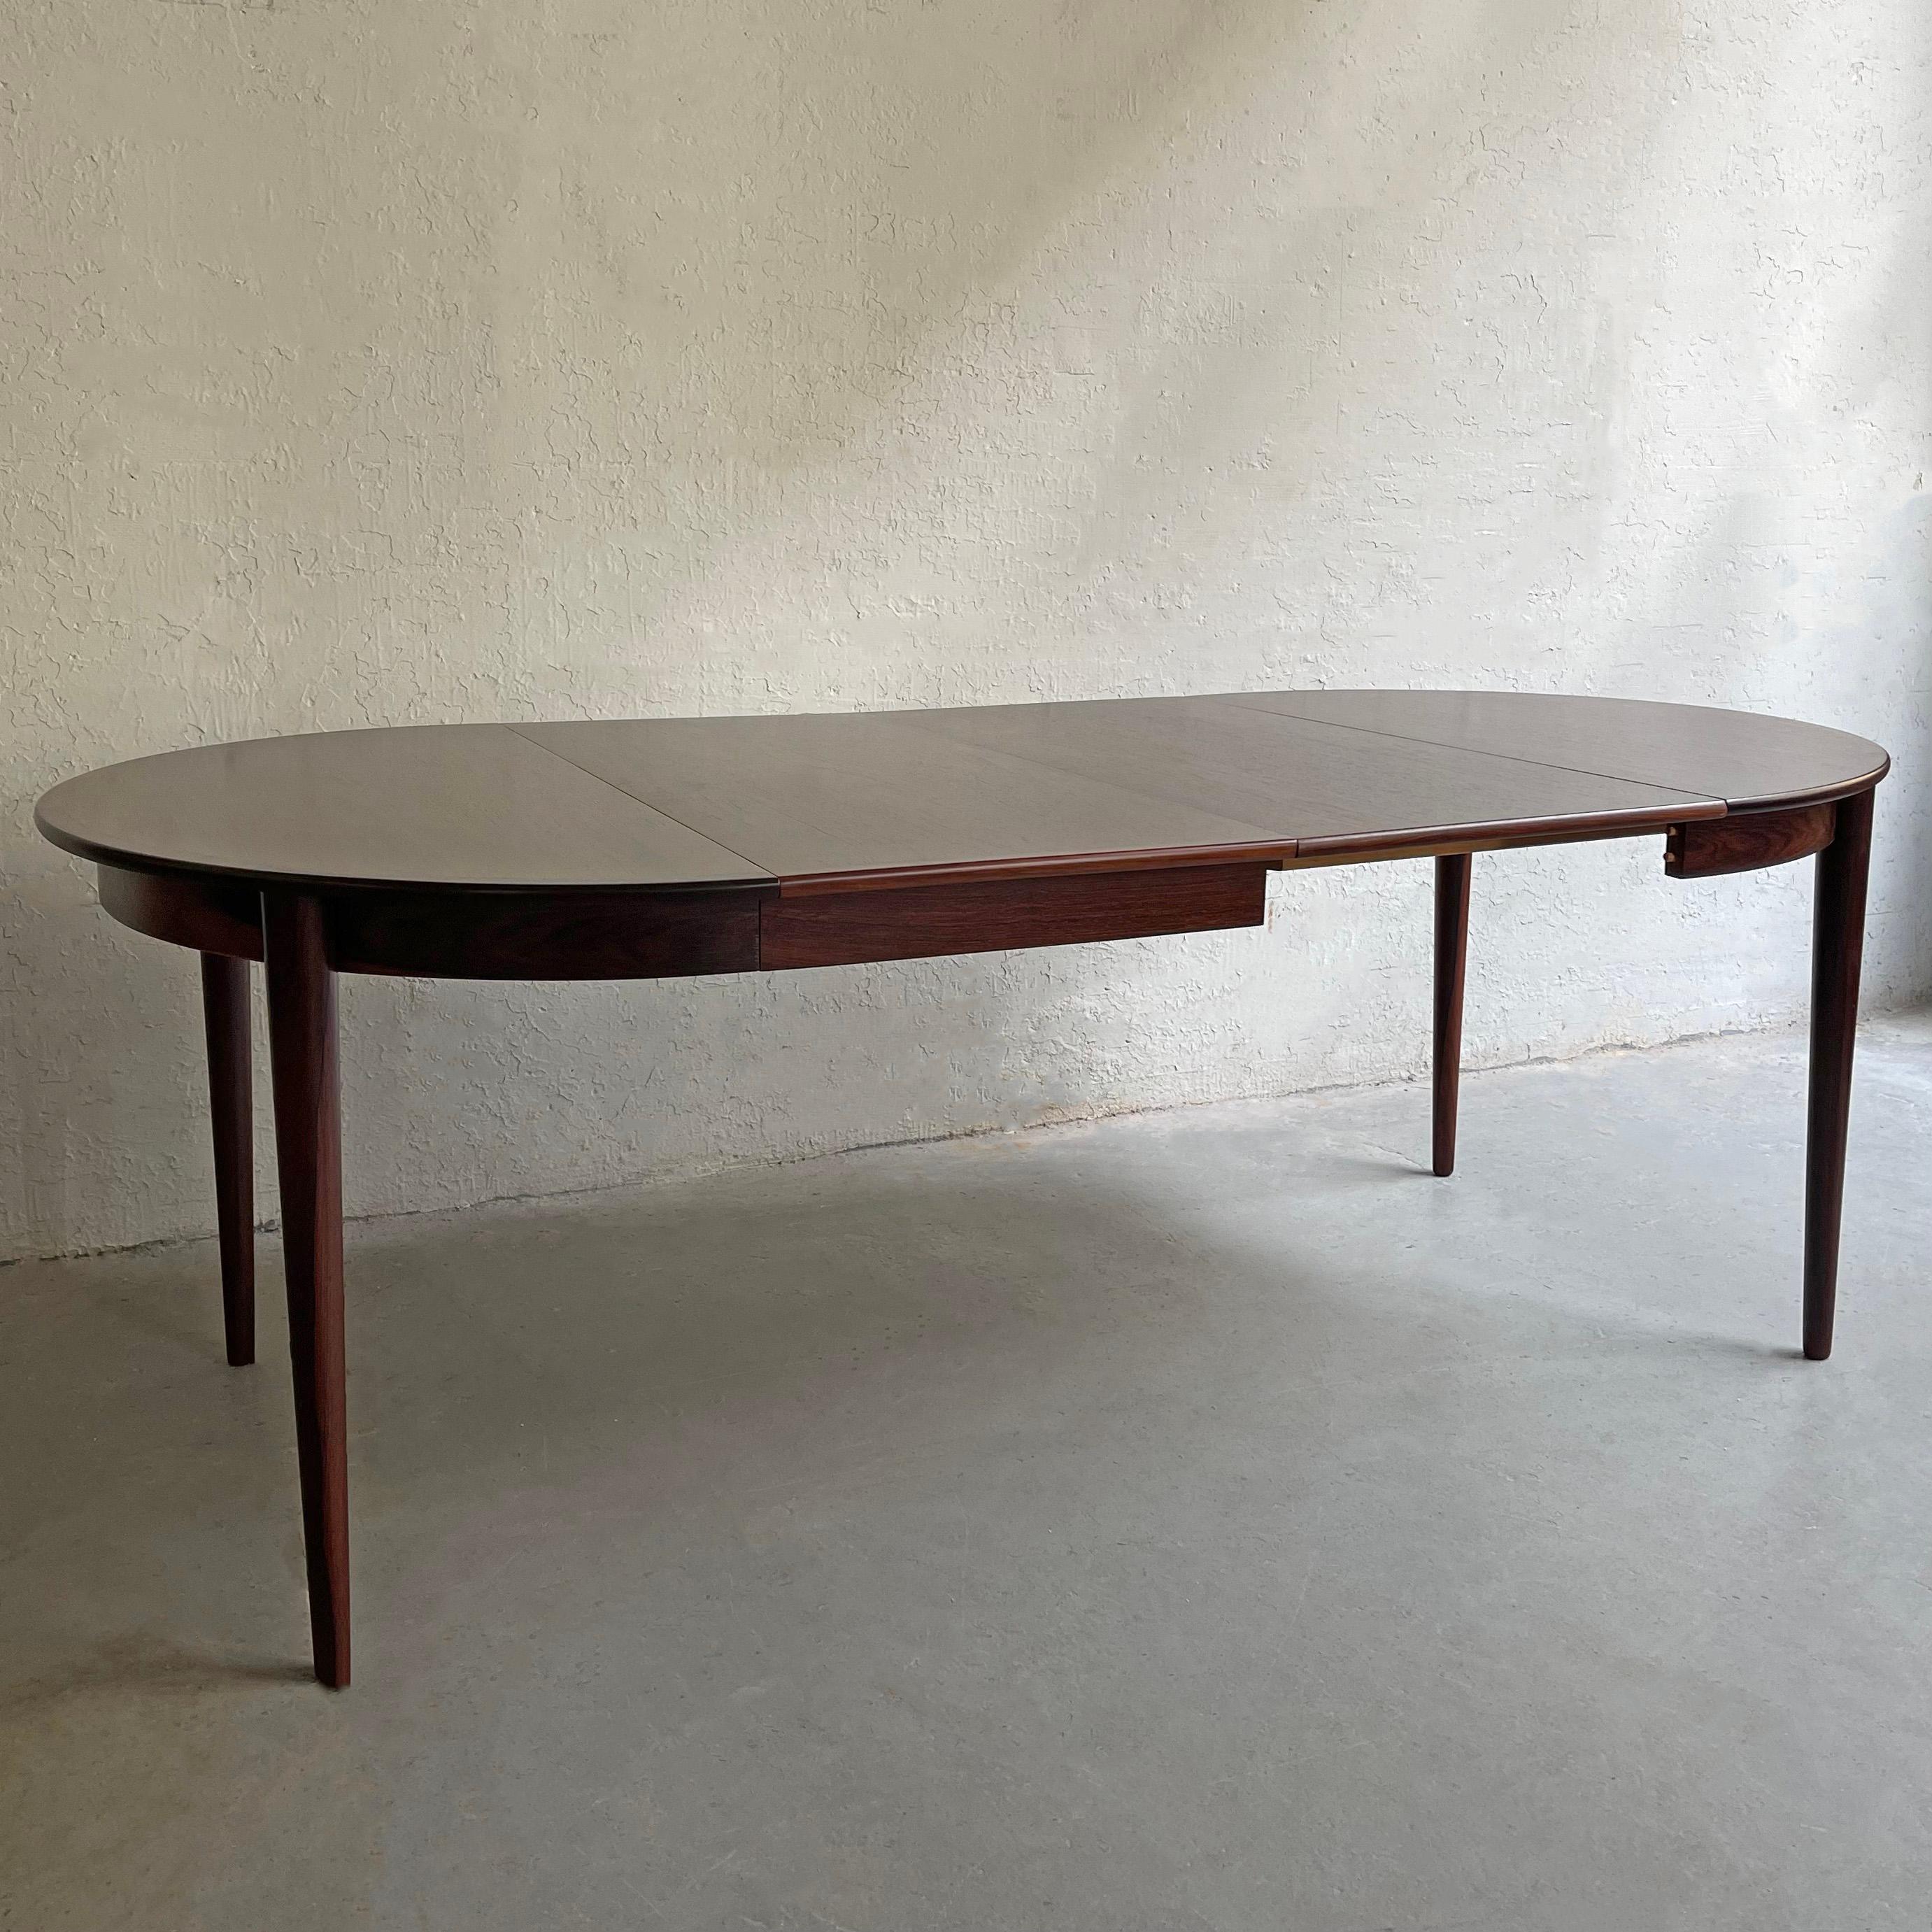 20th Century Scandinavian Modern Rosewood Round Extension Dining Set by Niels Koefoed For Sale